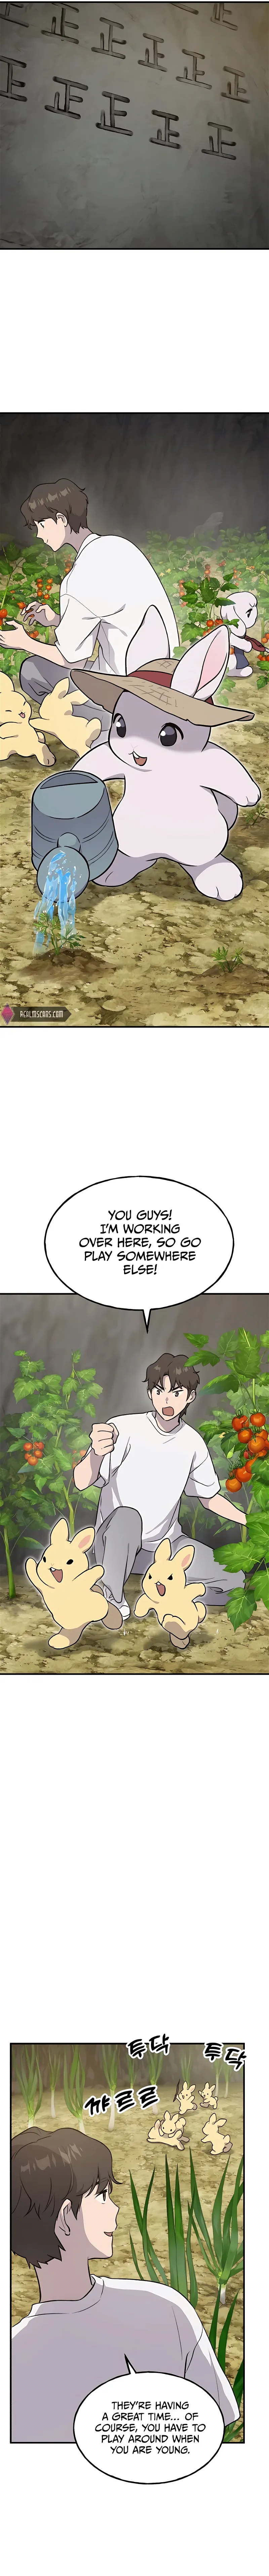 Solo Farming In The Tower Chapter 9 page 12